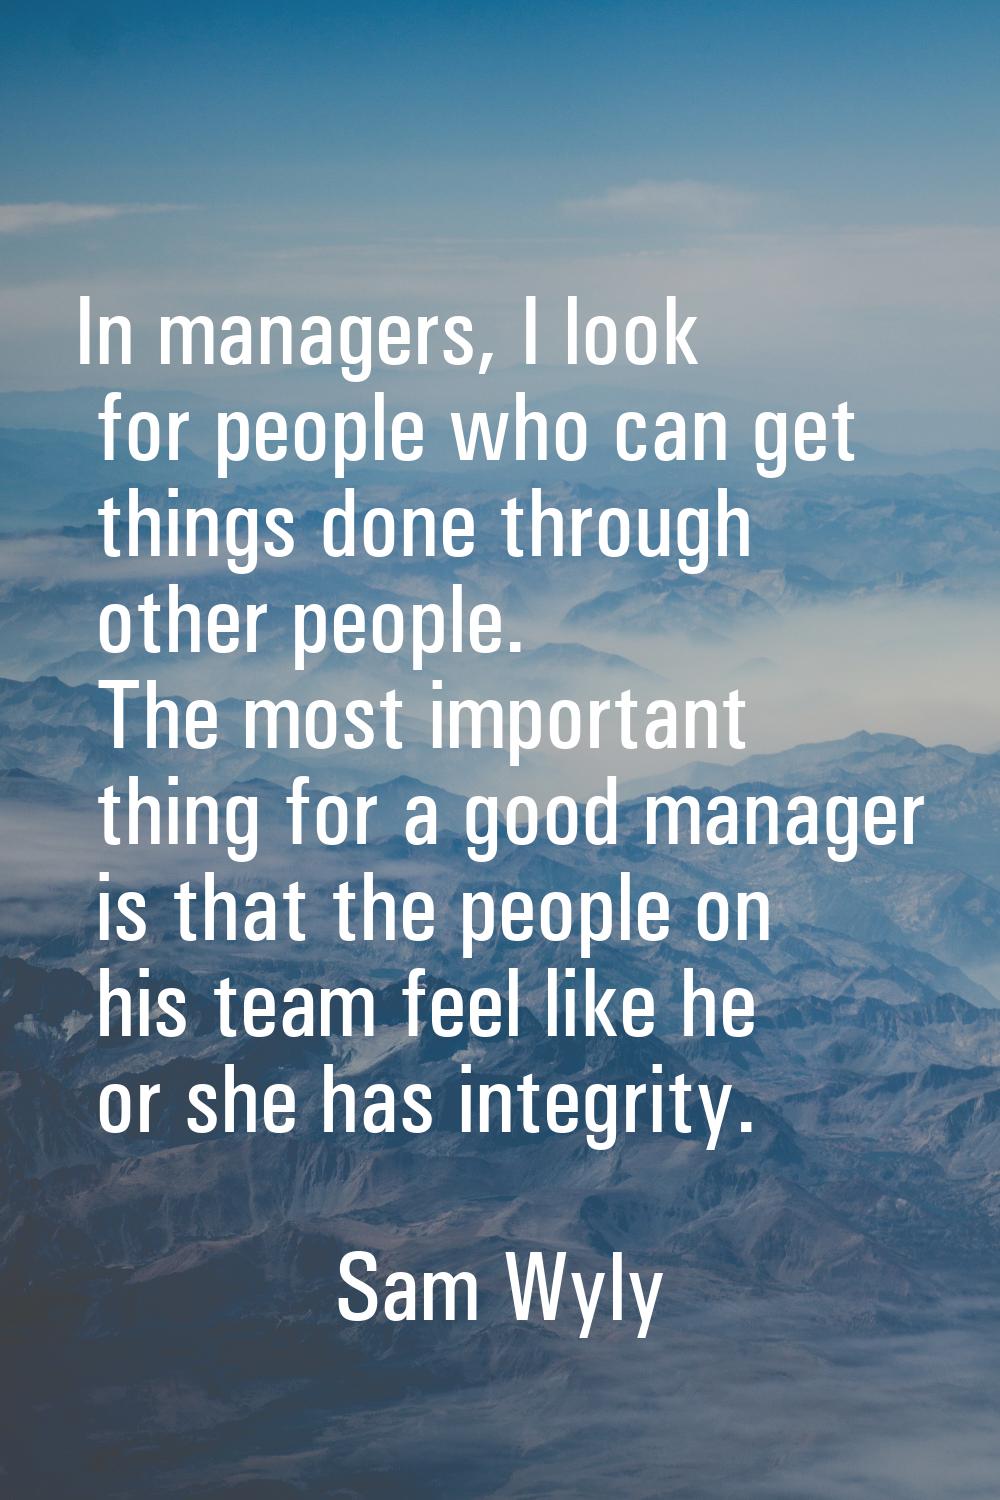 In managers, I look for people who can get things done through other people. The most important thi